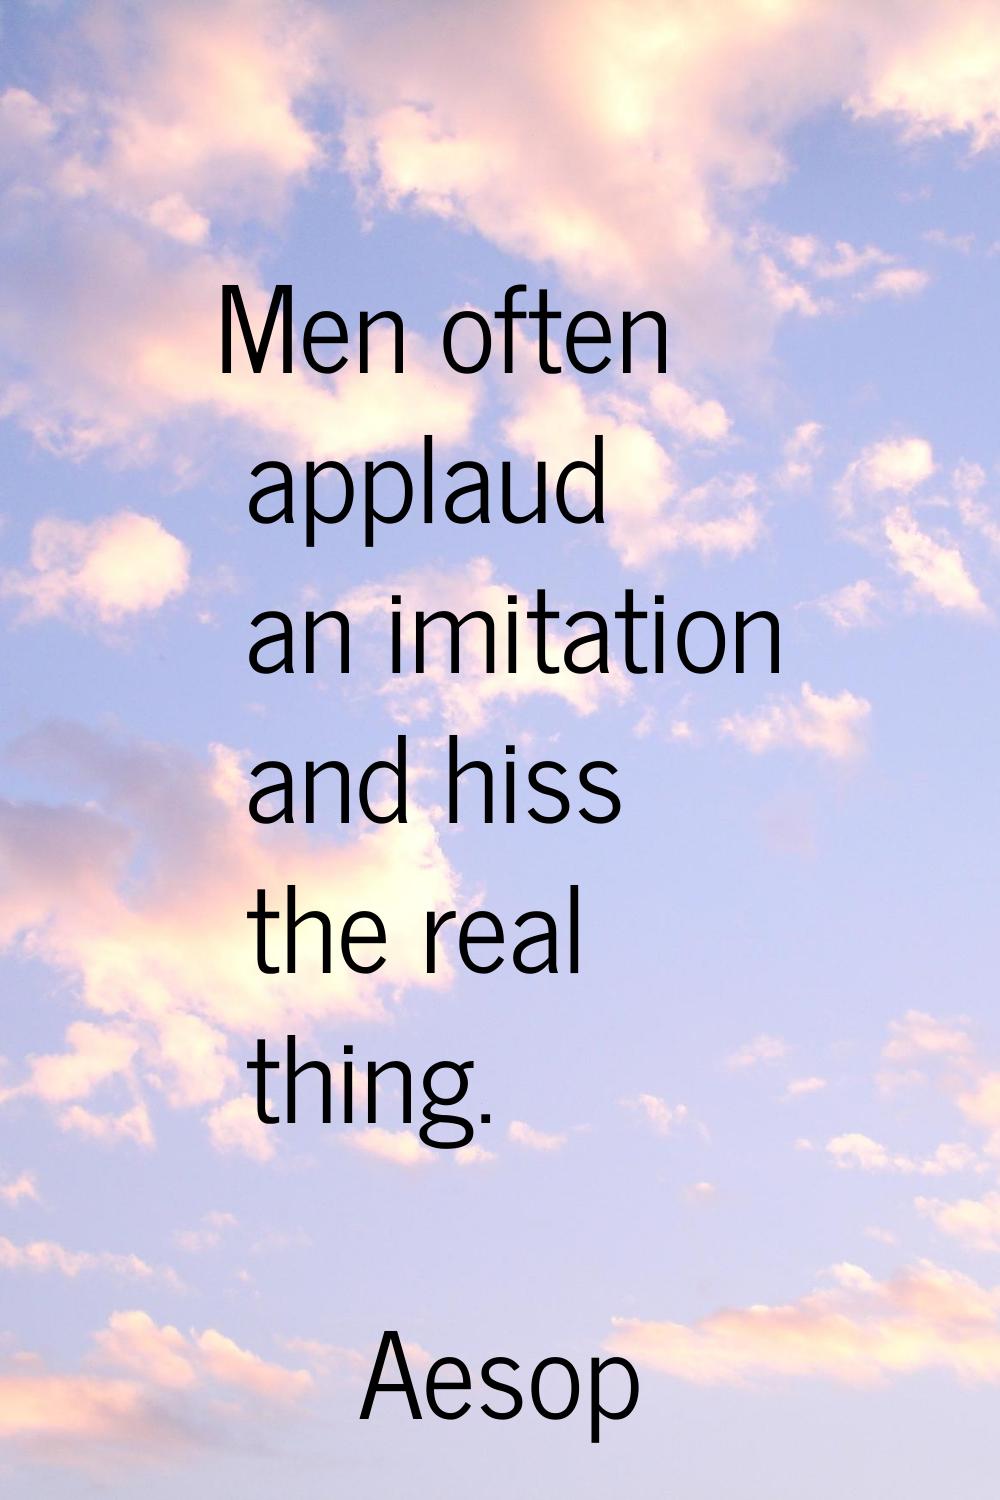 Men often applaud an imitation and hiss the real thing.